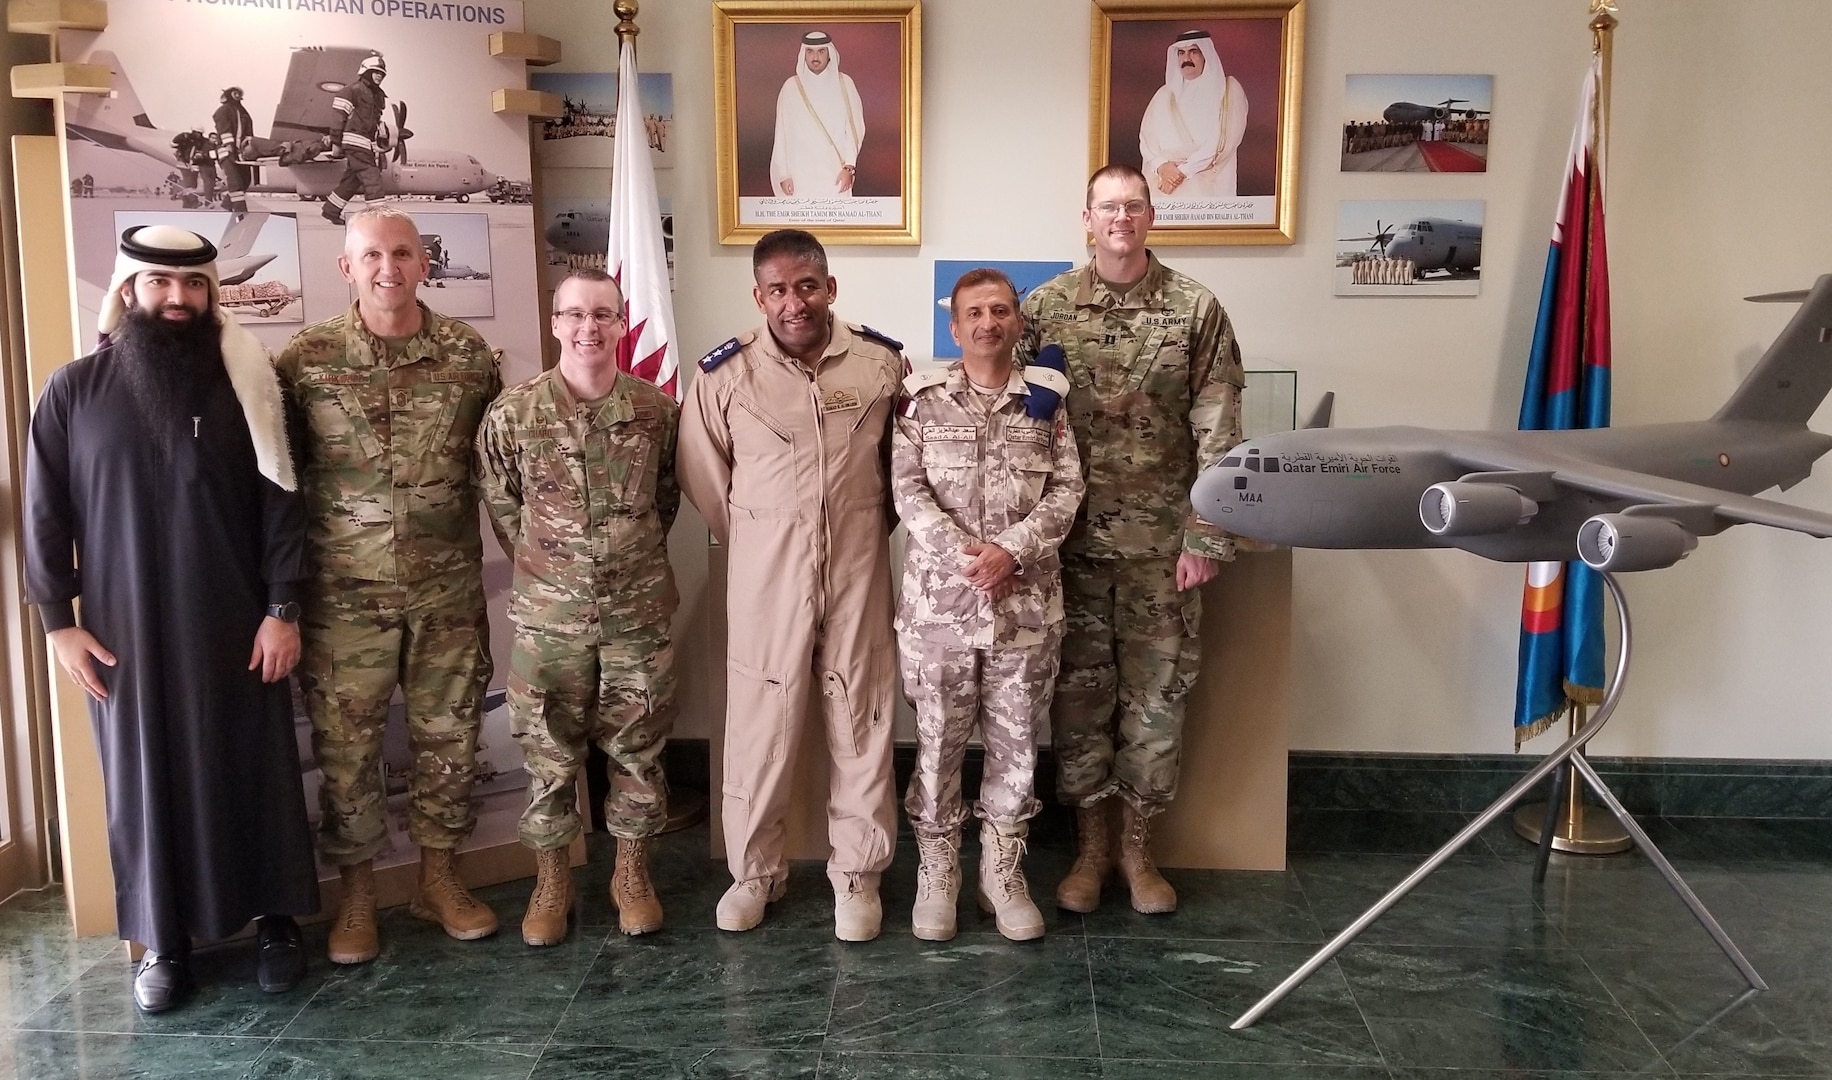 Members of the Qatar Emiri Air Force (QEAF) and the West Virginia National Guard pose for a photo Feb. 14, 2019, while touring the QEAF facilities at Al Udeid Air Base, Qatar. During a five-day tour, three members of the West Virginia Air National Guard’s 130th and 167th Airlift Wings, as well as the State Partnership Program Coordinator for Qatar,  were provided insight into the operations of Qatar’s air force and met with key QEAF leaders for discussion on interoperability of forces and future engagement opportunities. (Courtesy photo)